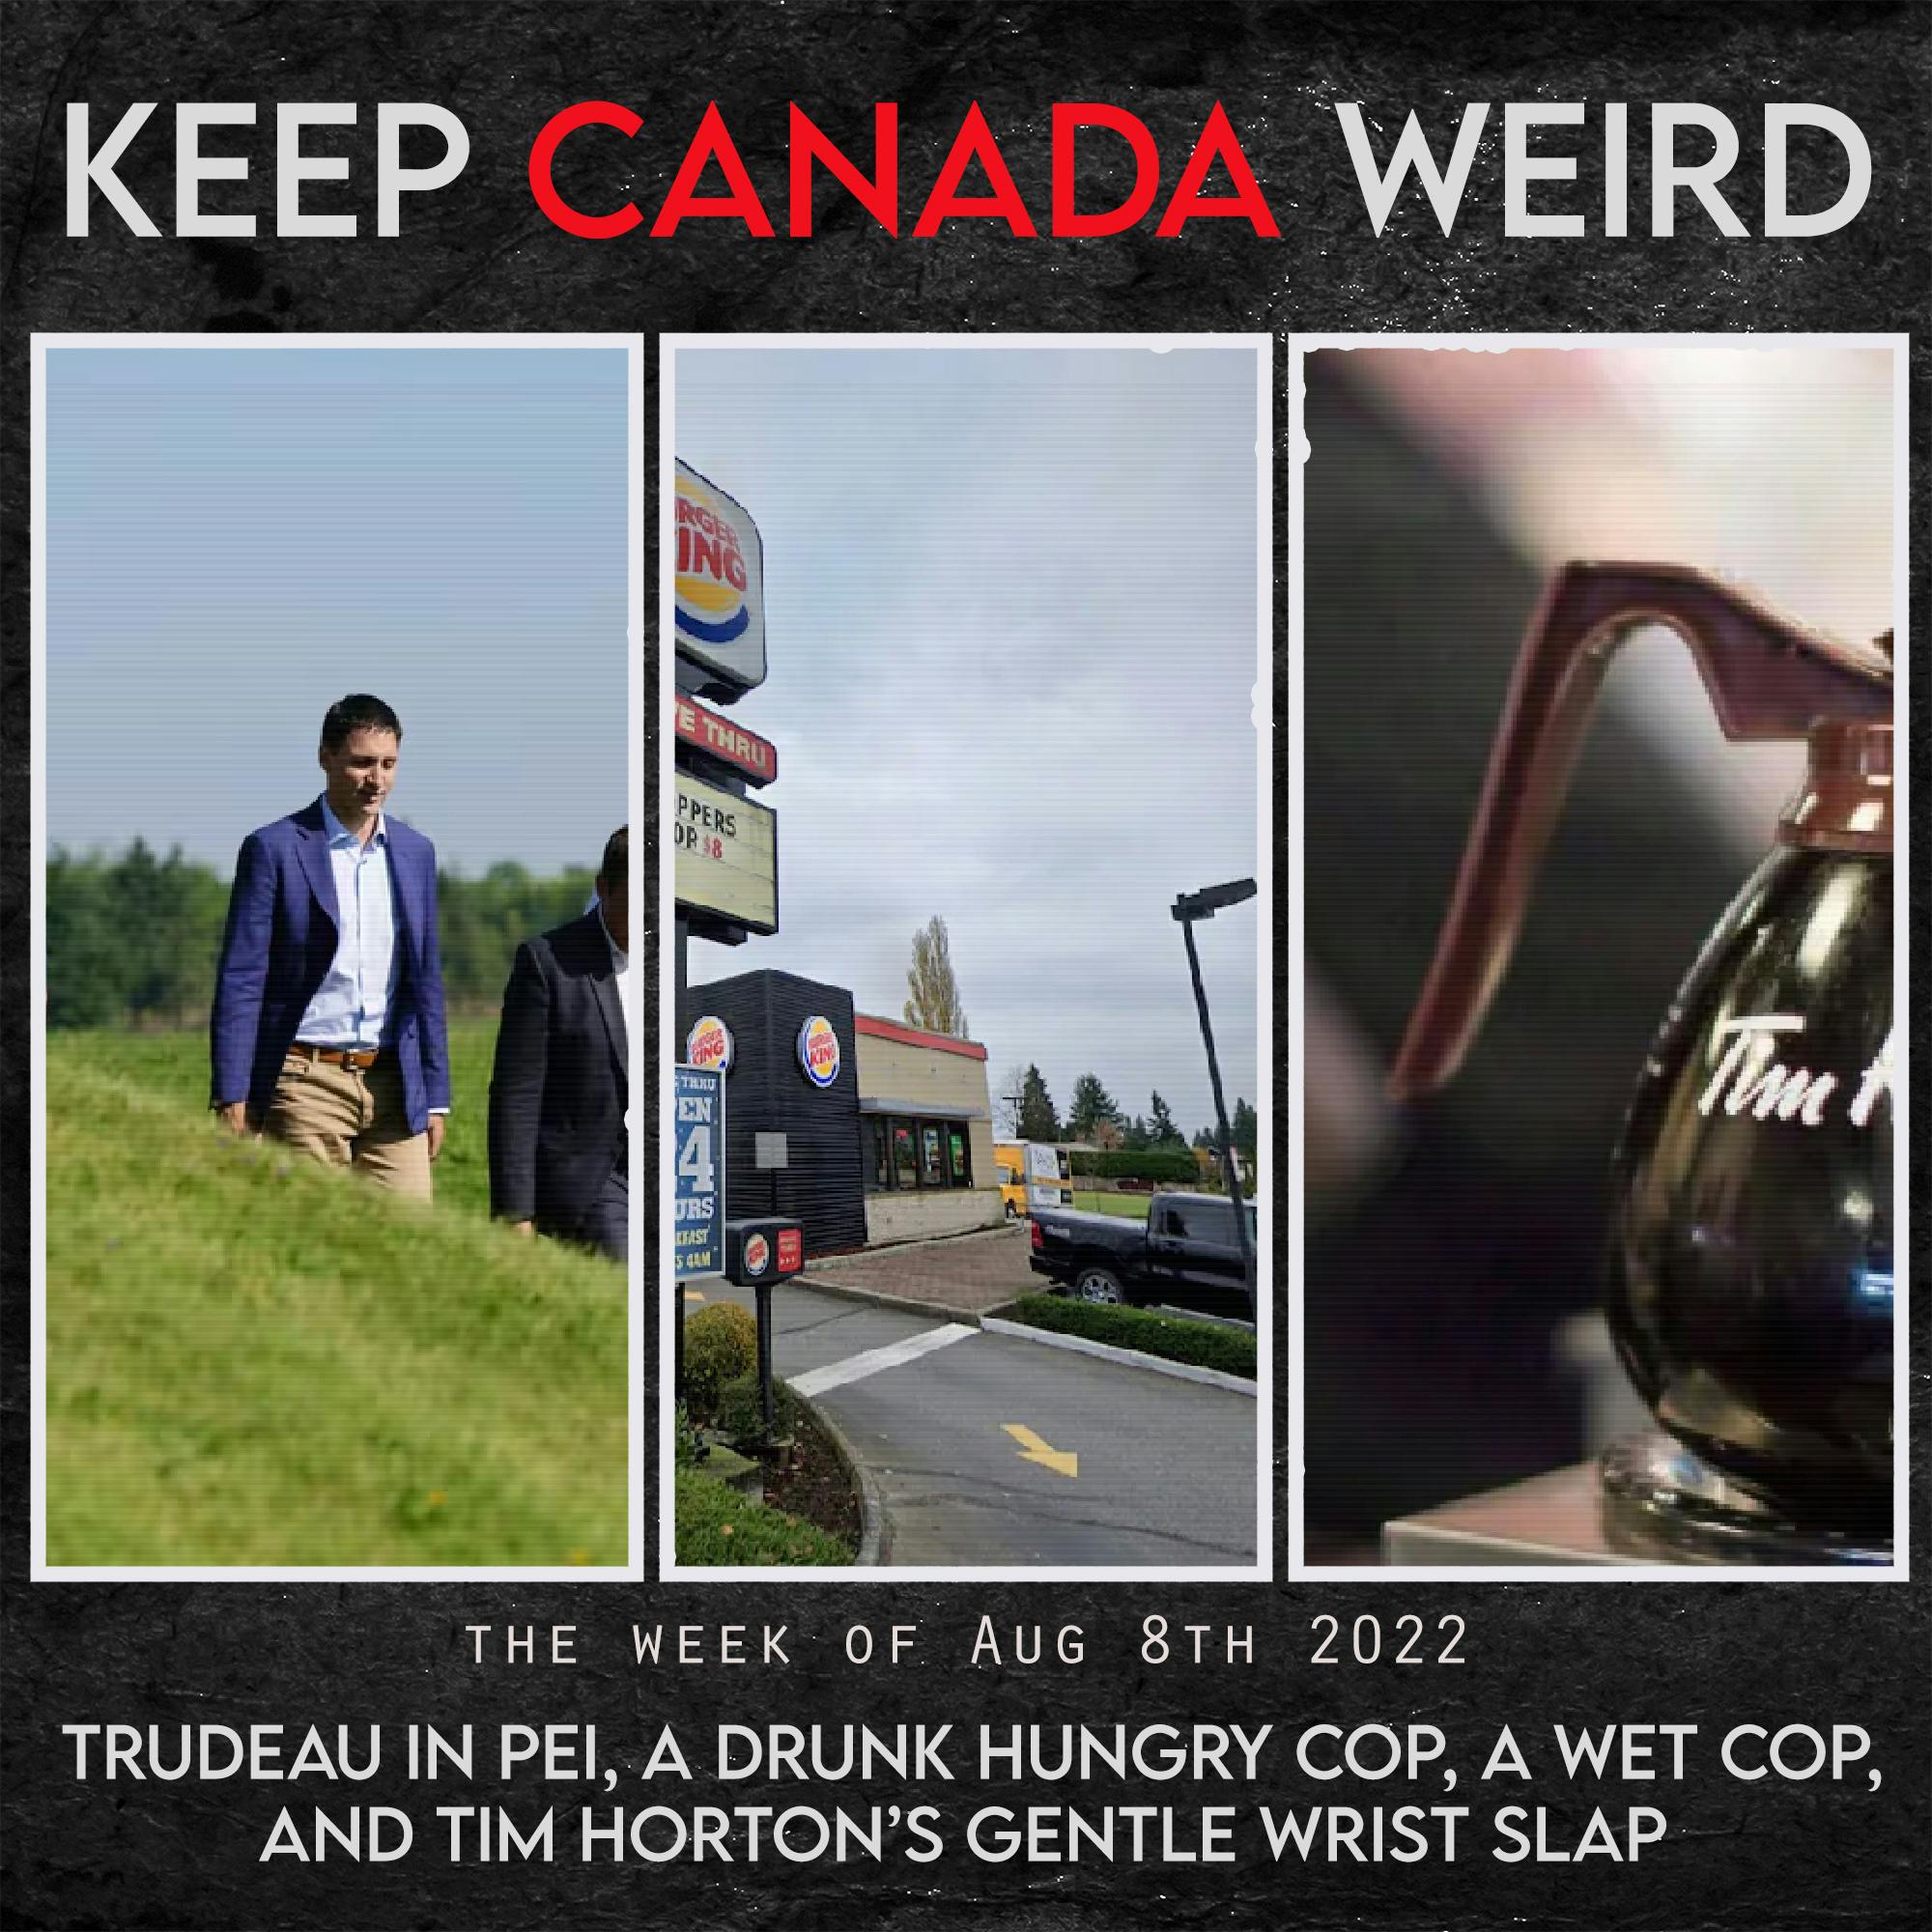 KEEP CANADA WEIRD - Aug 4, 2022 - Trudeau in PEI, a drunk/hungry cop, a wet cop, and Tim Horton's class action nonsense